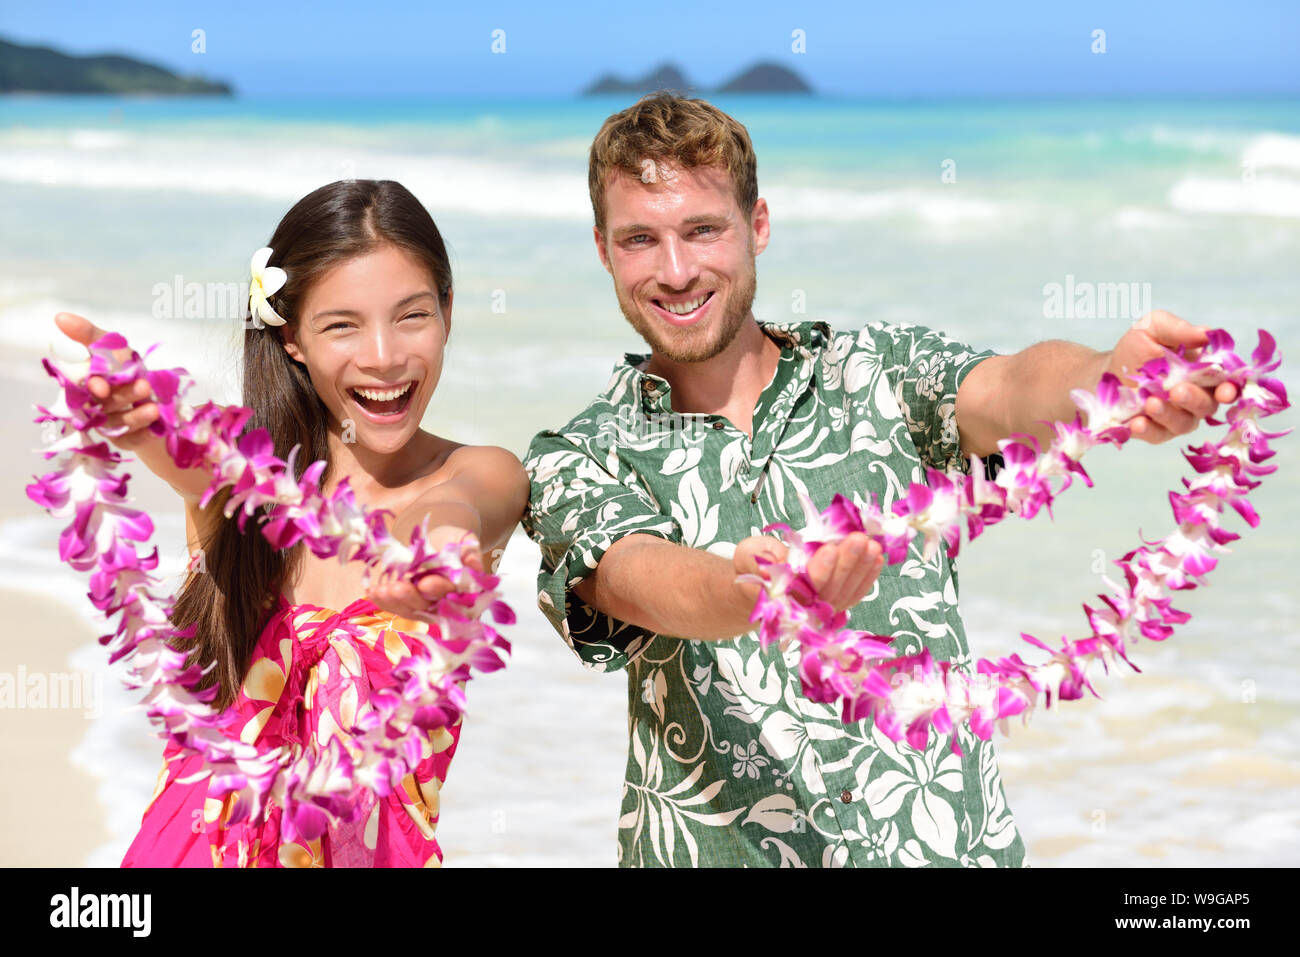 Welcome to Hawaii - Hawaiian people showing giving leis flower necklaces as welcoming gesture for tourism. Travel holidays concept. Asian woman and Caucasian man on white sand beach in Aloha clothing. Stock Photo